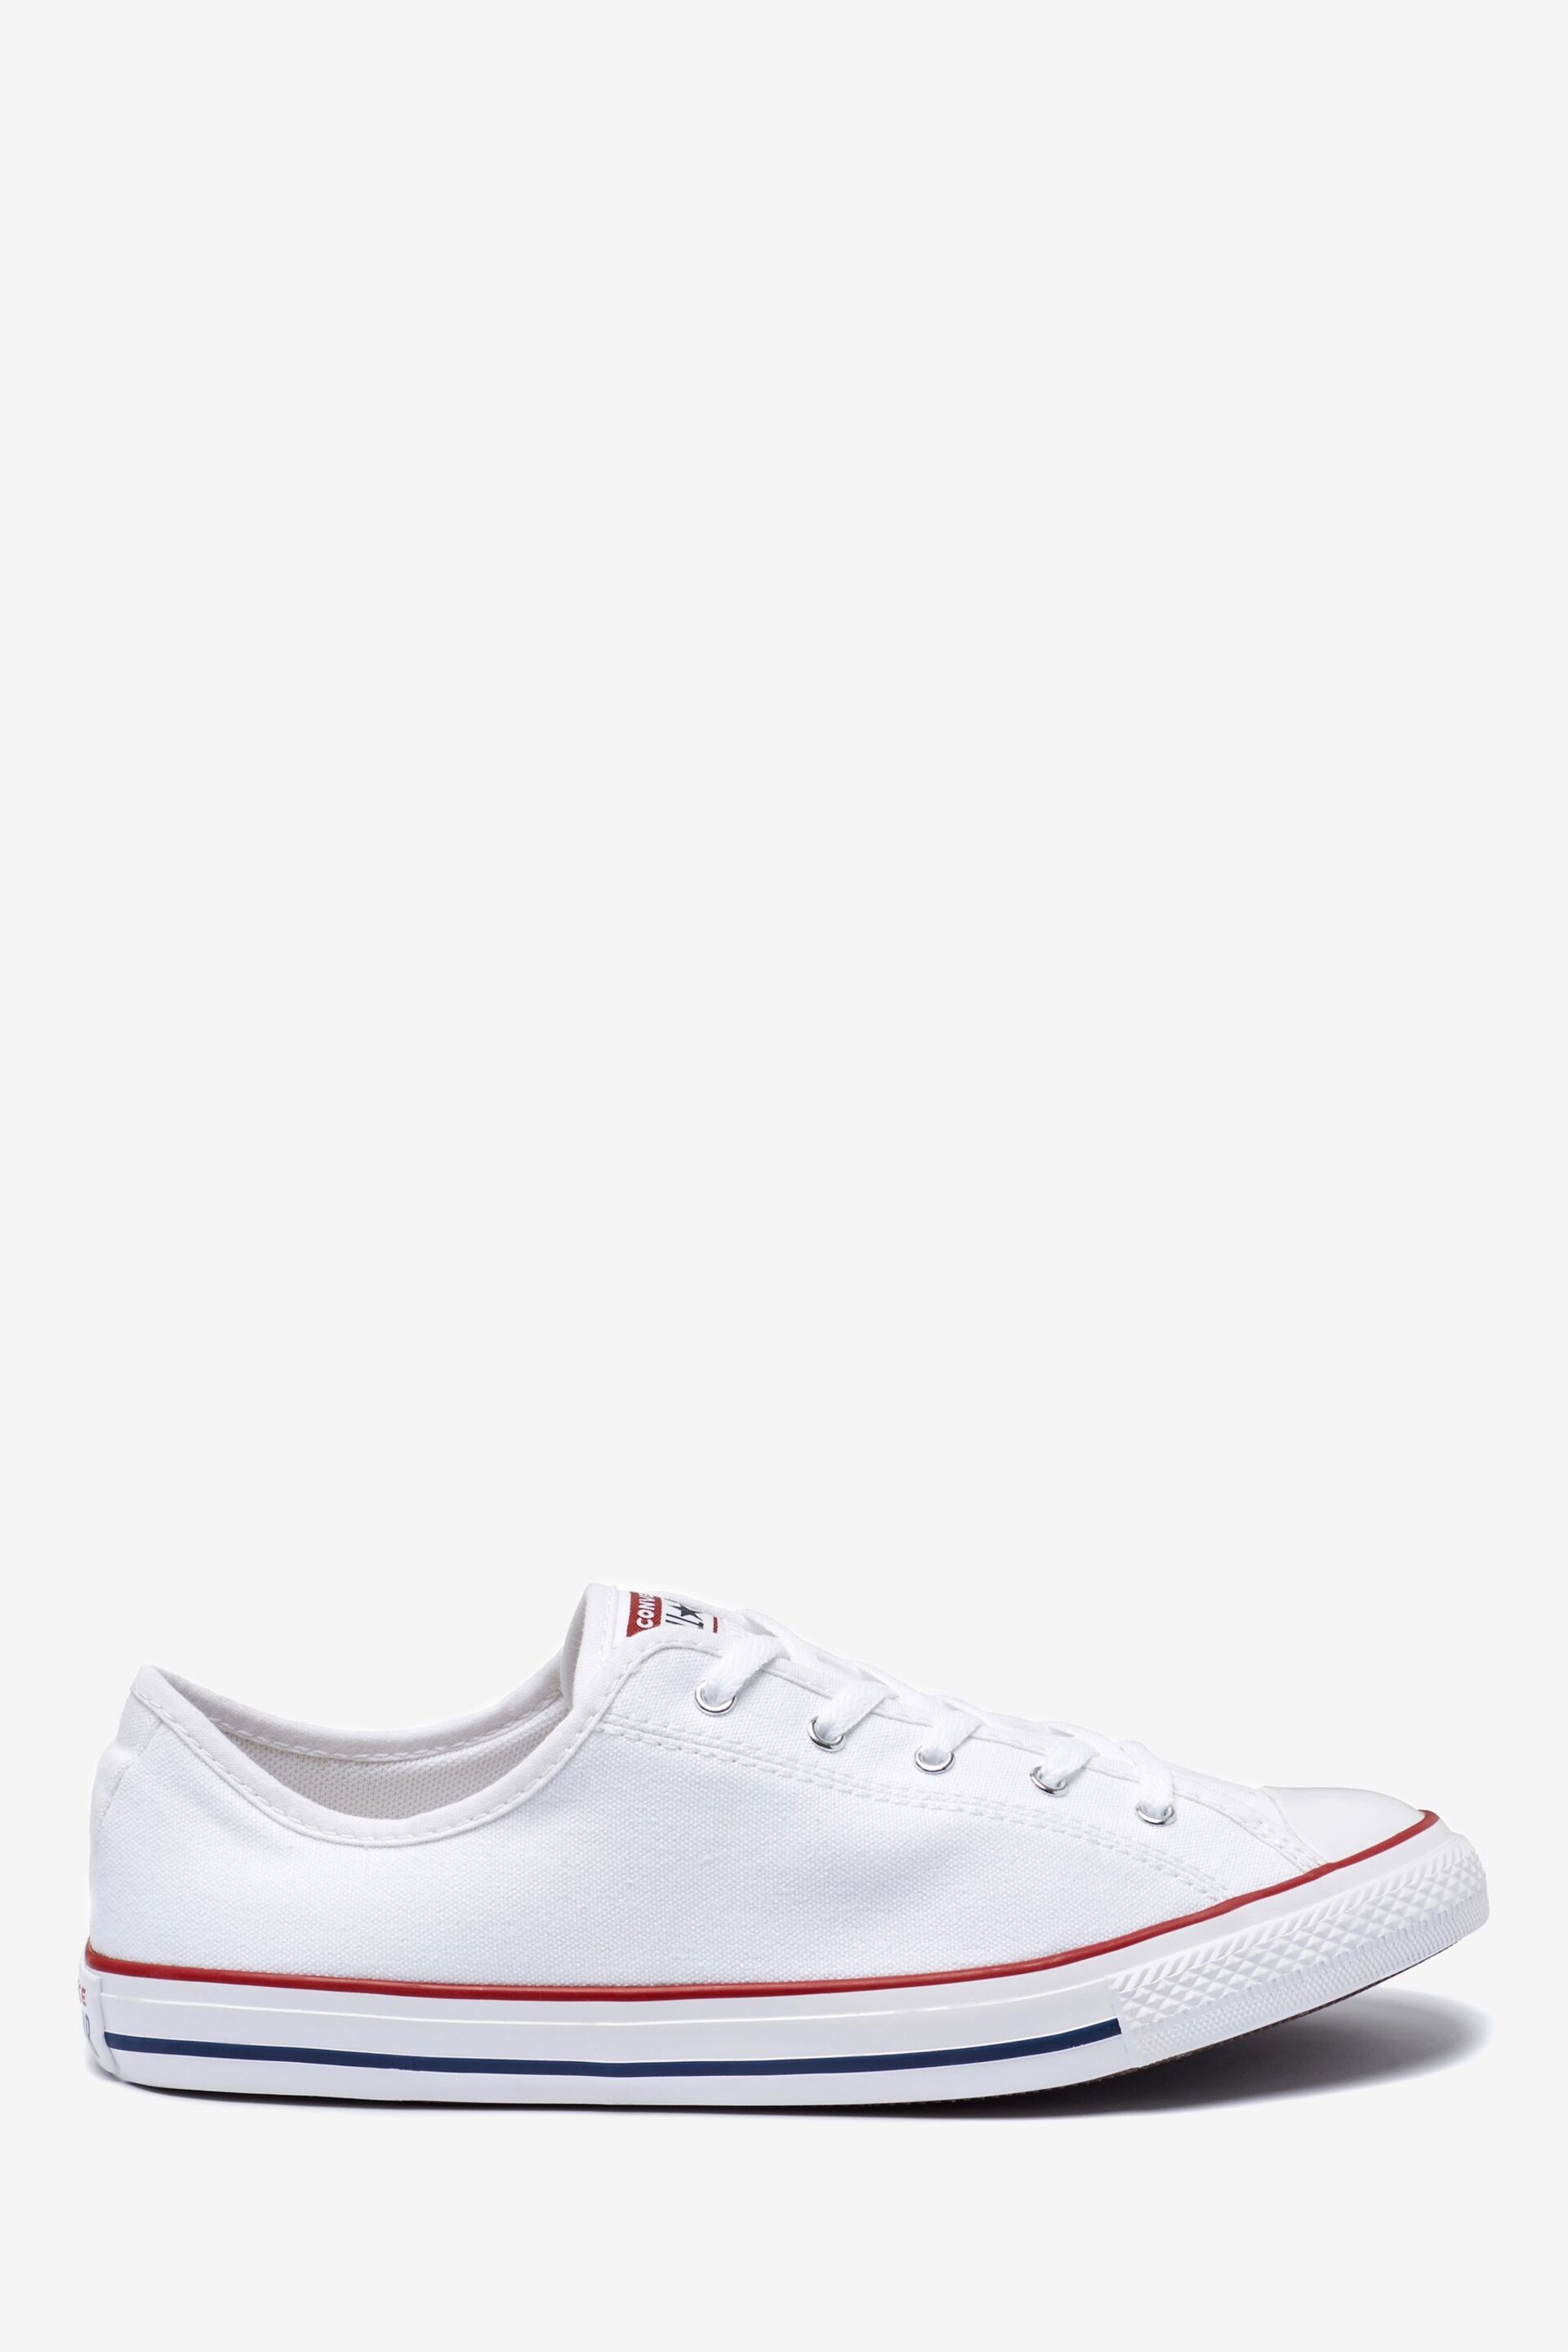 Converse White Dainty Trainers - Image 1 of 5